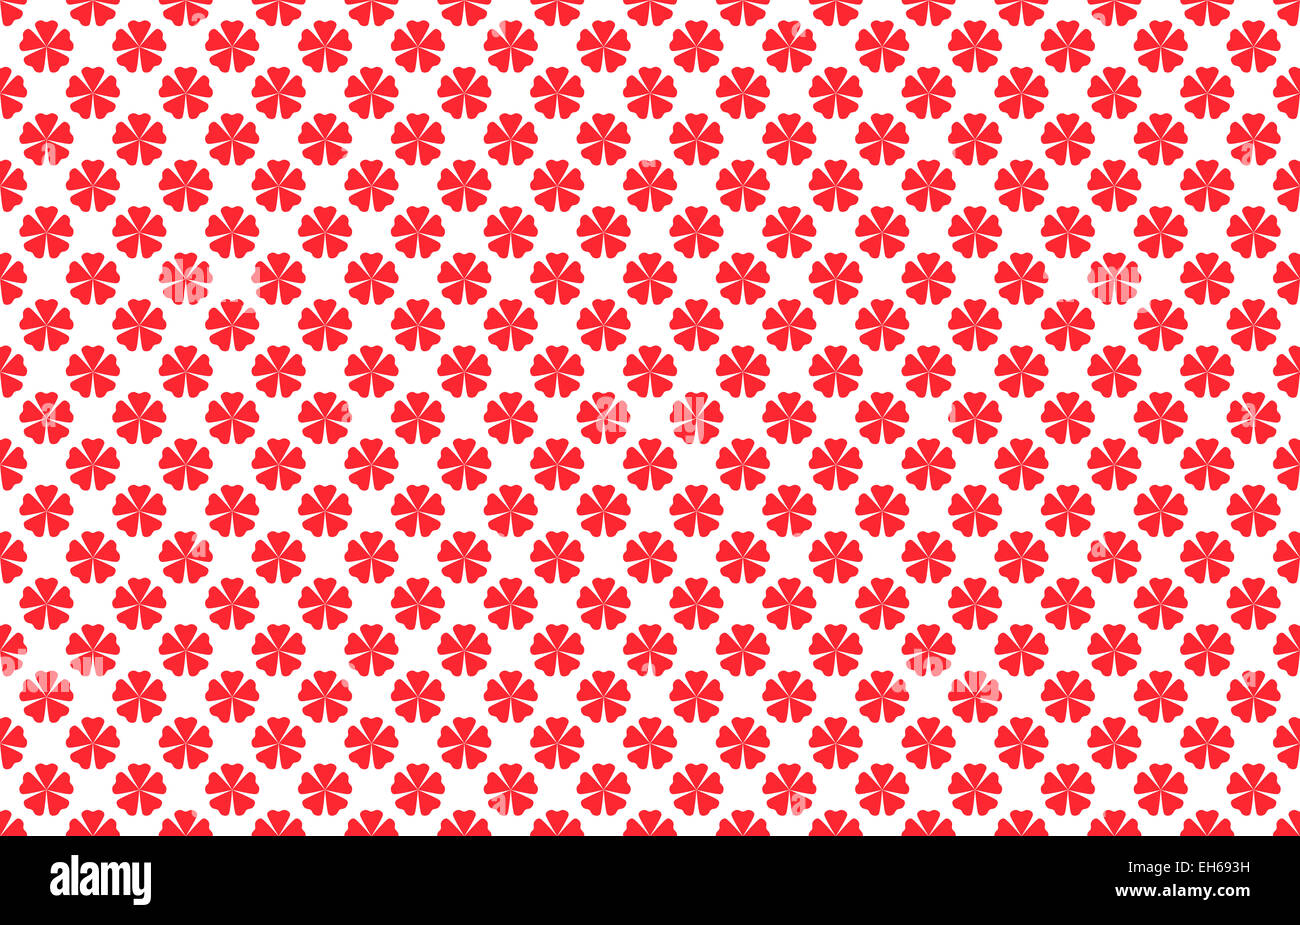 White floral patterns on a red background for decoration. Stock Photo